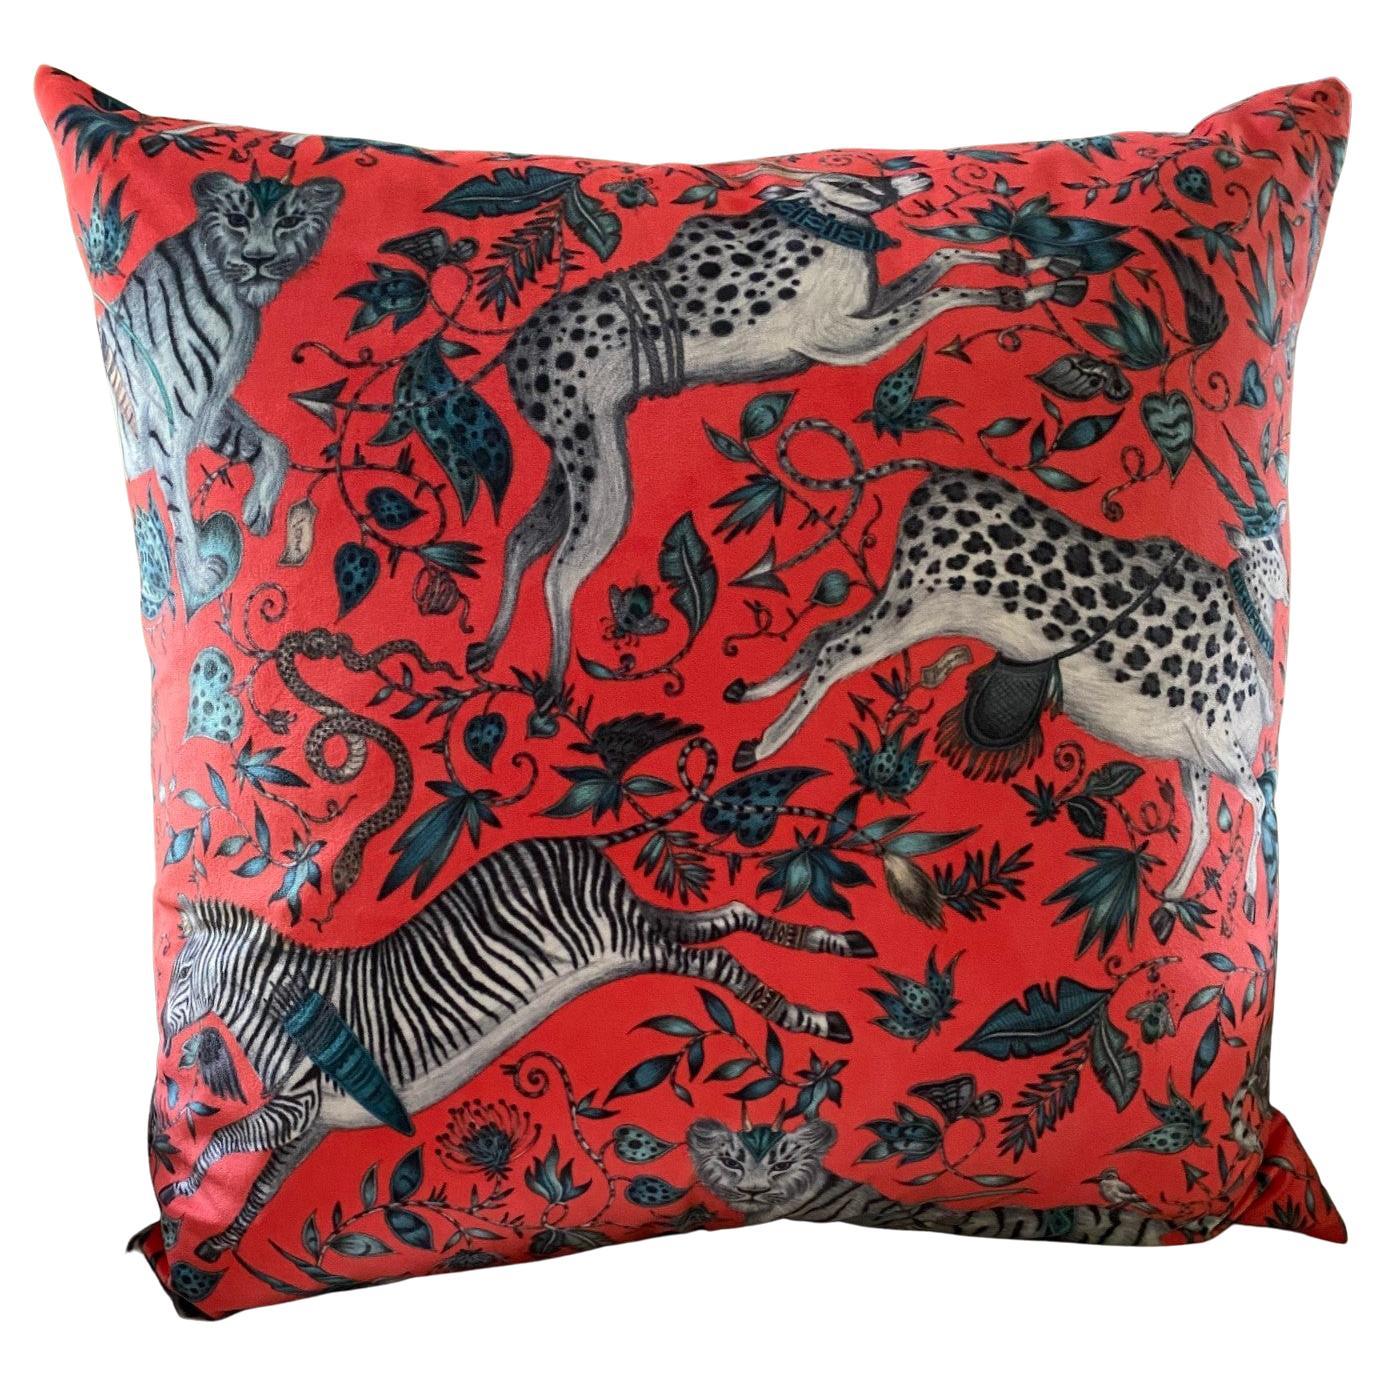 A P.G. Ruskin and Company knife-edge square pillow (zippered case and down insert) in bright coral red Protea Velvet - Emma J Shipley (front) and contrasting teal cotton velvet (back). These pillows are exclusive to P.G. Ruskin and Company and are